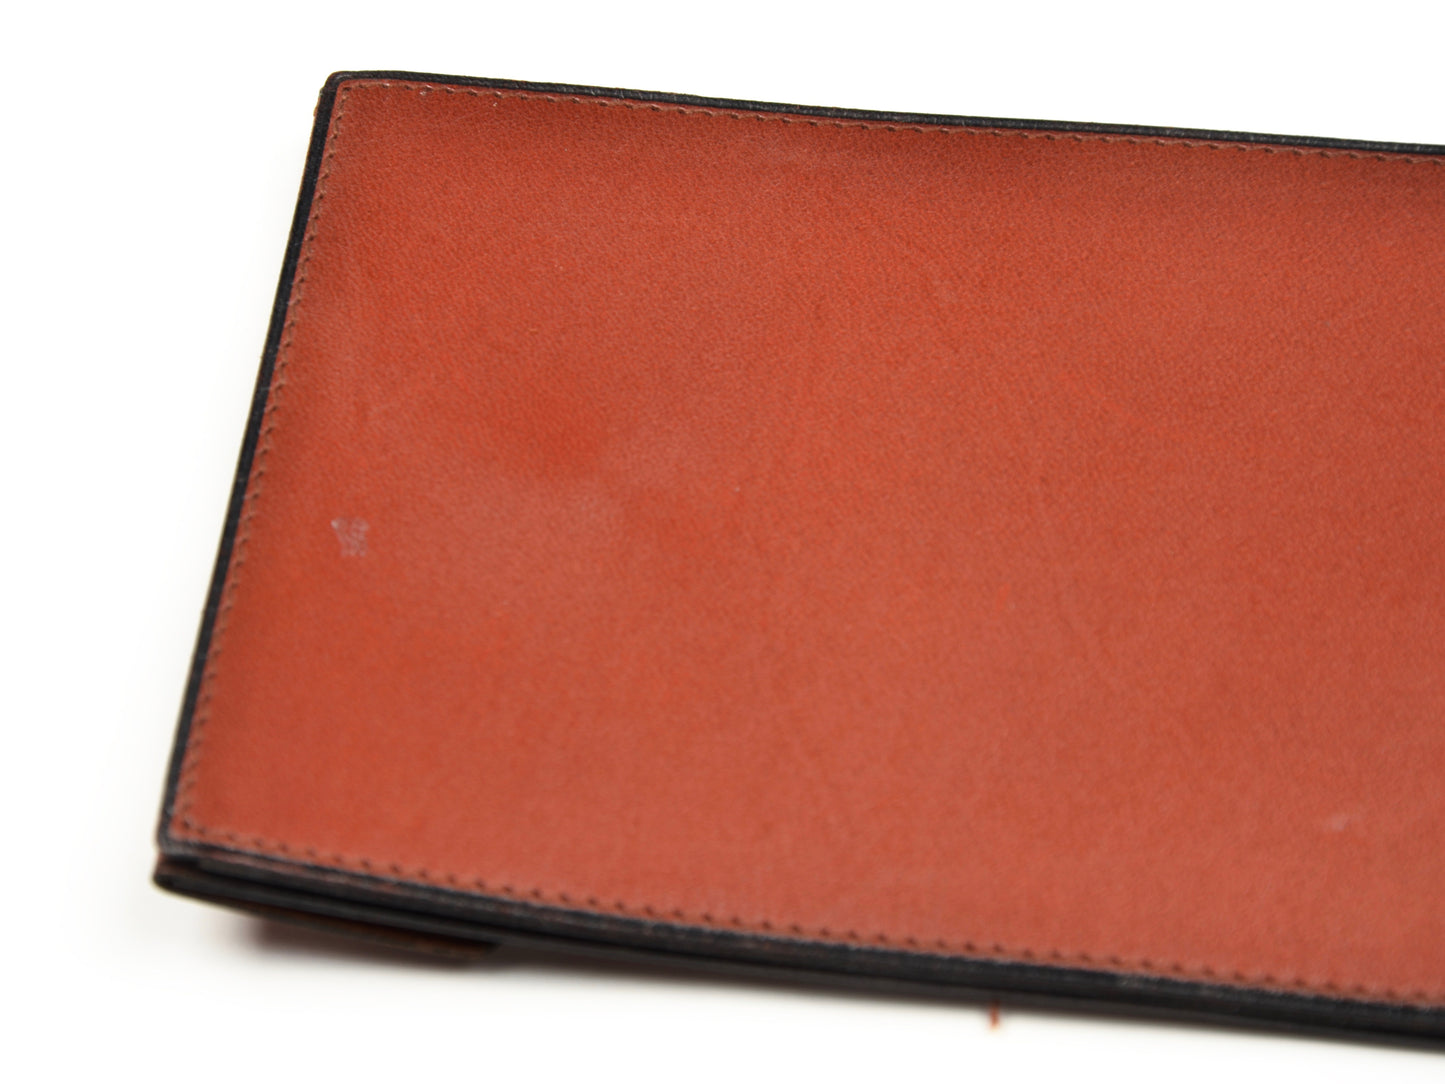 Valextra Milano Wallet/Billfold with Clip and Snap Closure - Tan